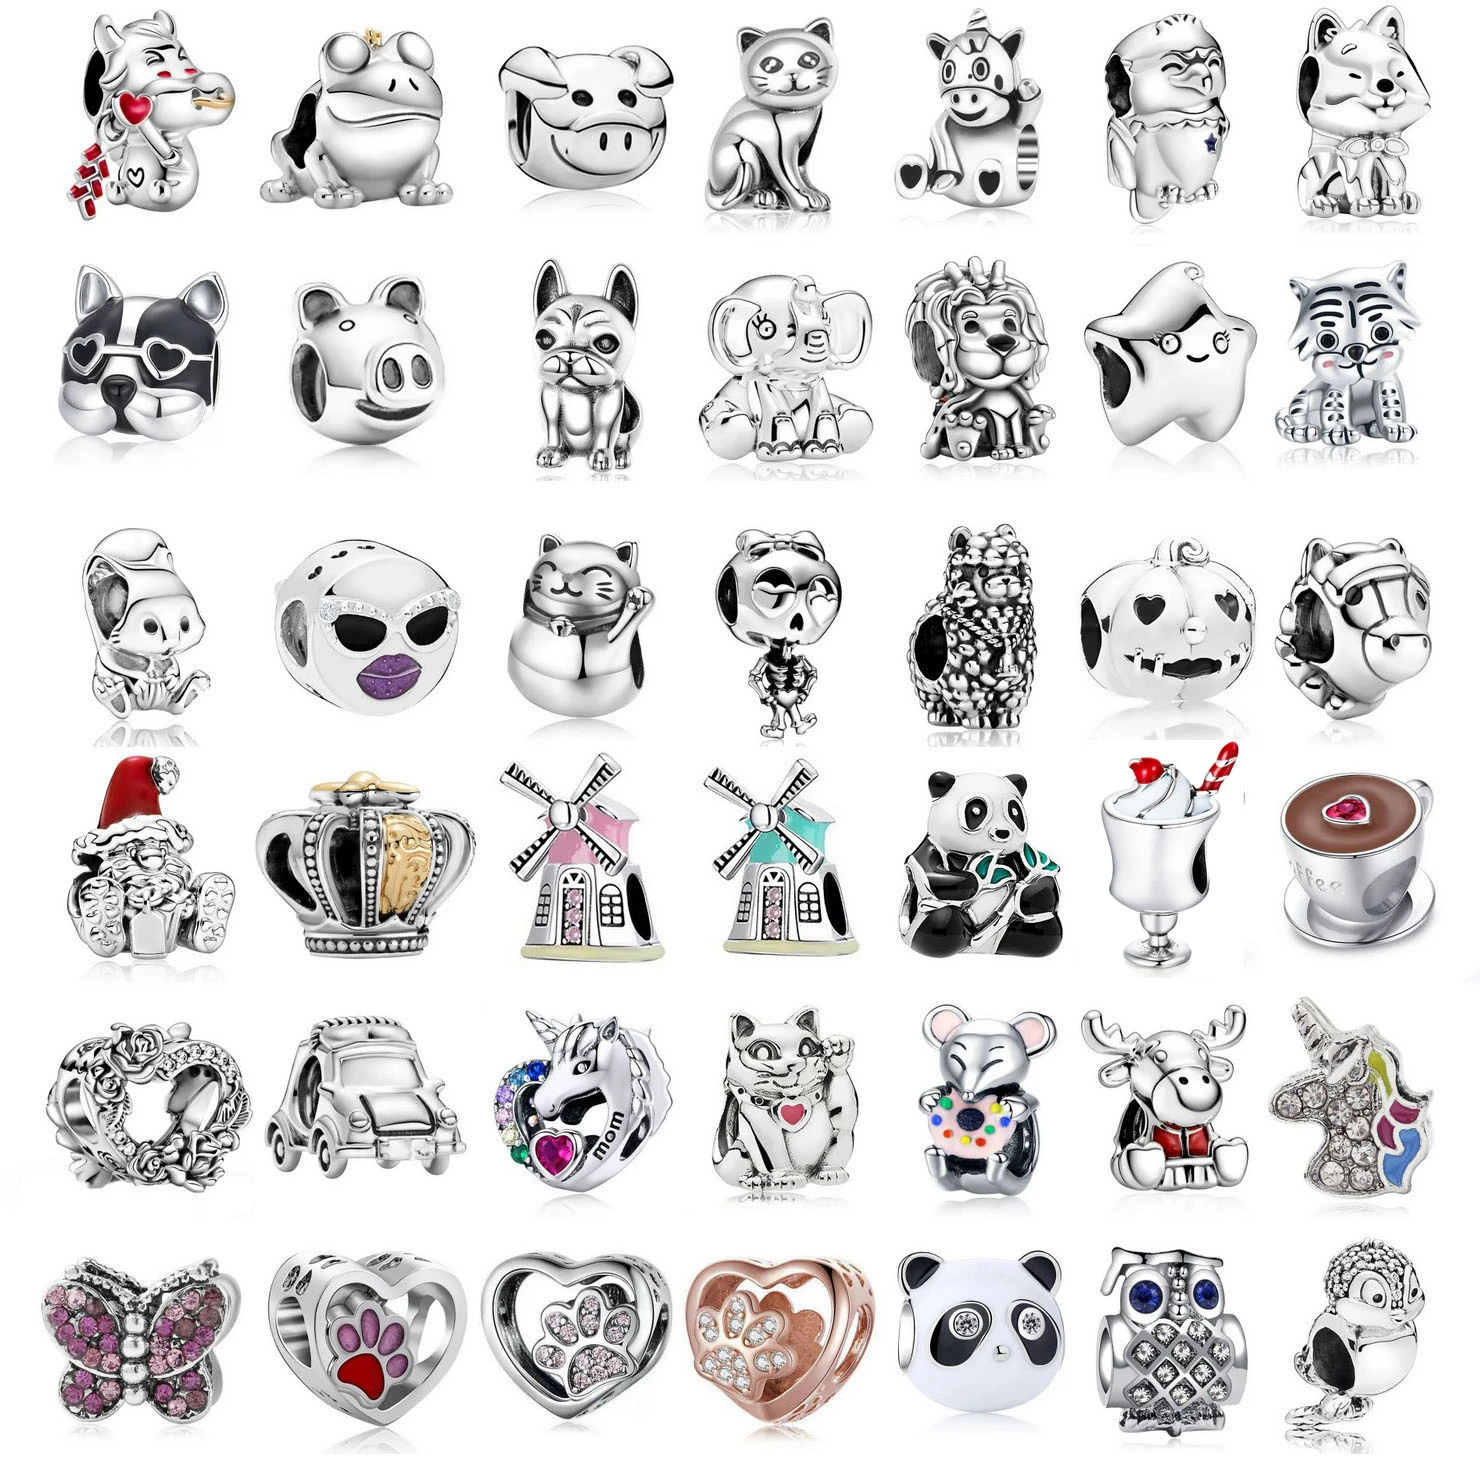 2021 New Silver Color Firecracker Bull Ox Dog Beads Charm Fit Pandora Bracelets & Necklaces for Women DIY Jewelry Gift Making beadwork